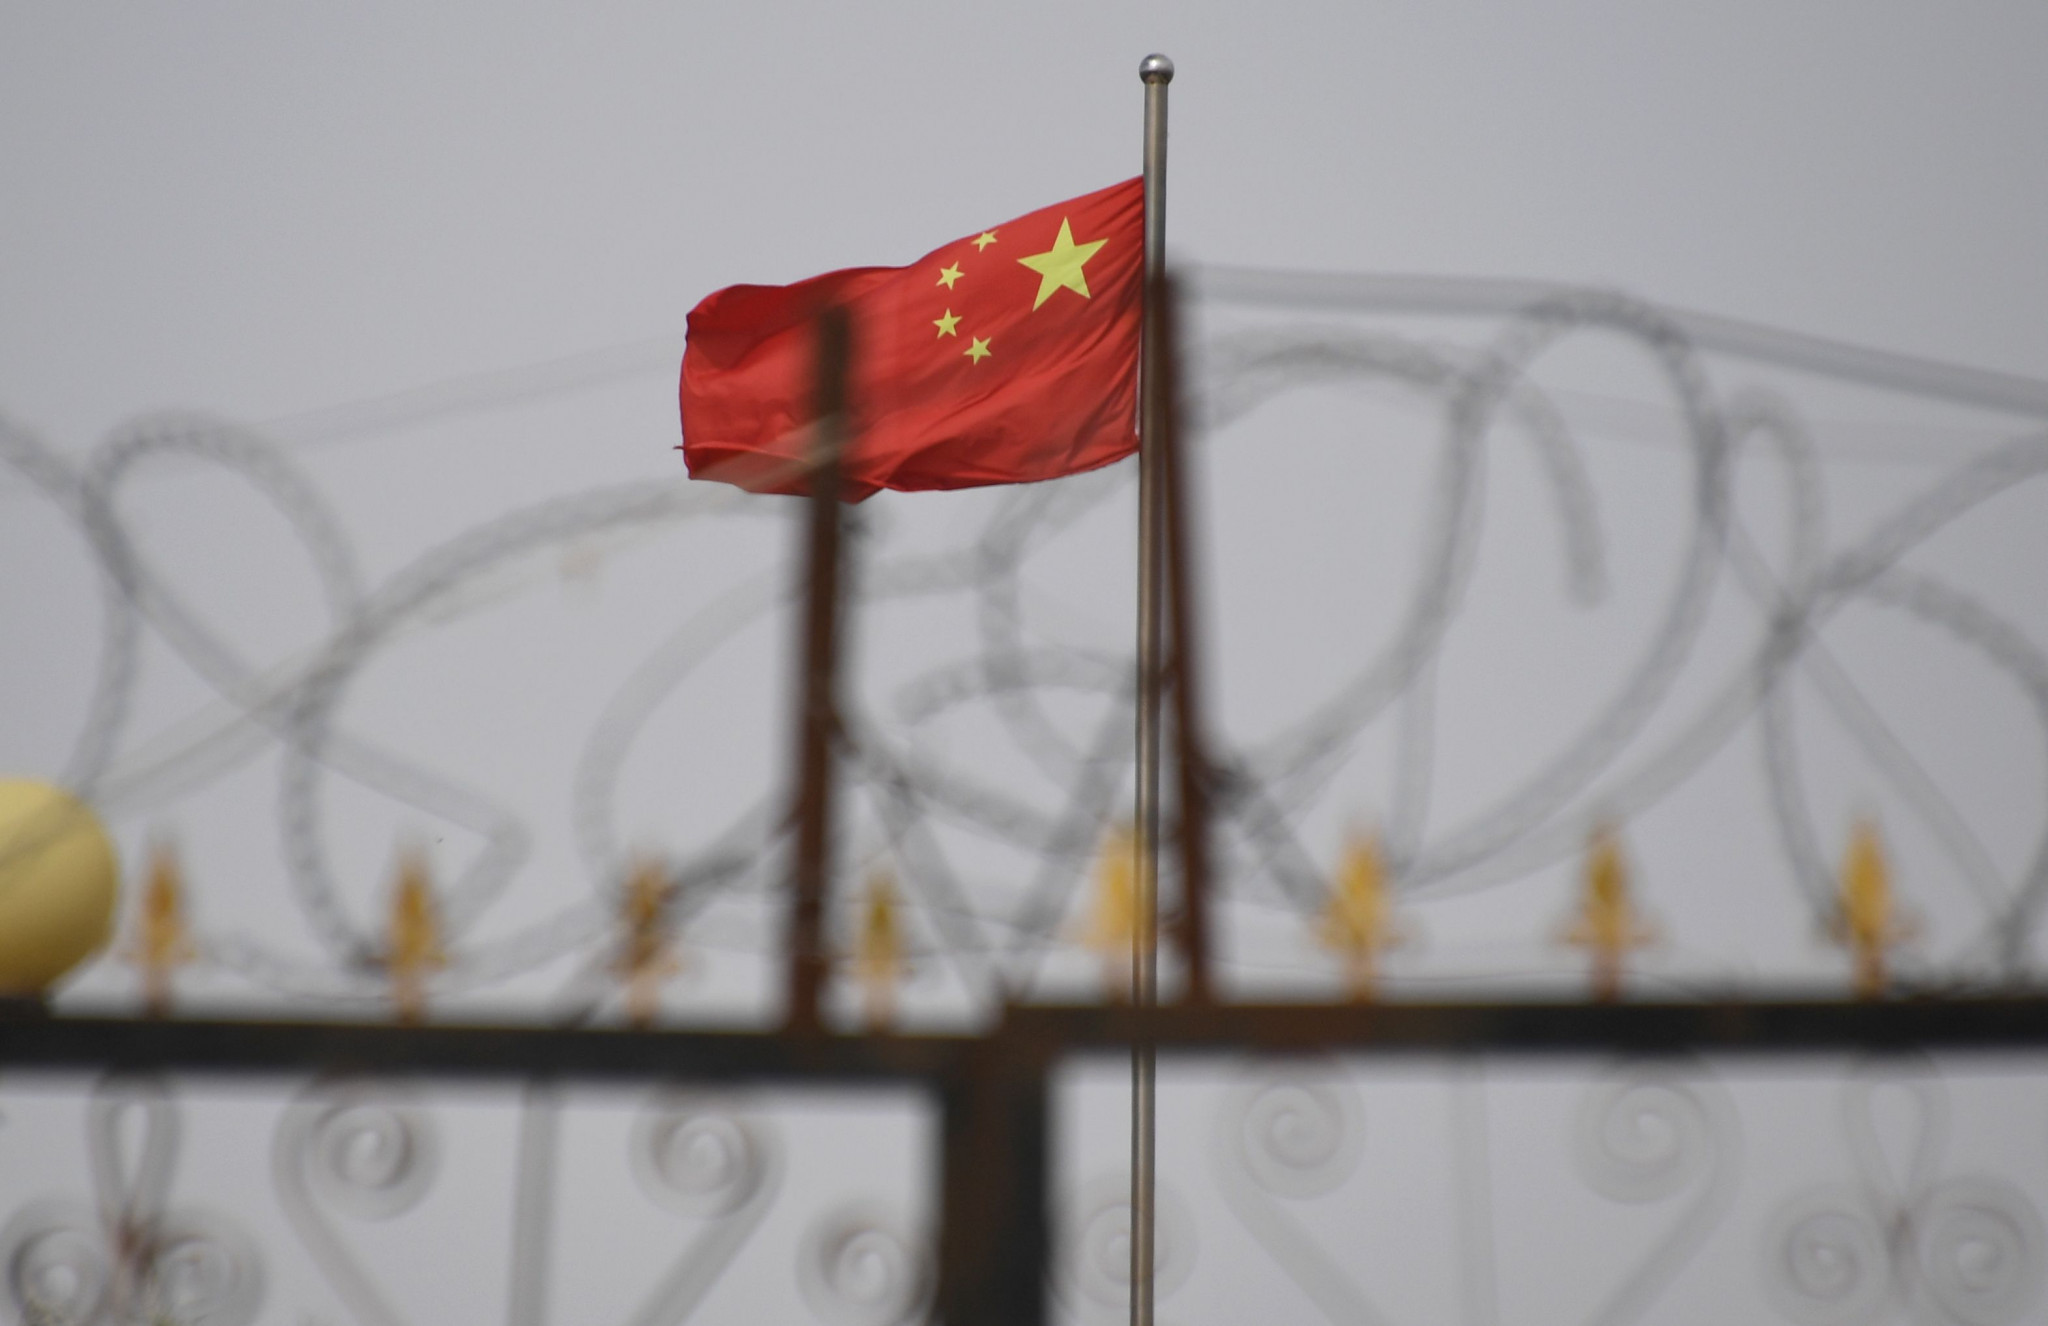 China's human rights record has been challenged by Human Rights Watch in a video series with Badiucao ©Getty Images